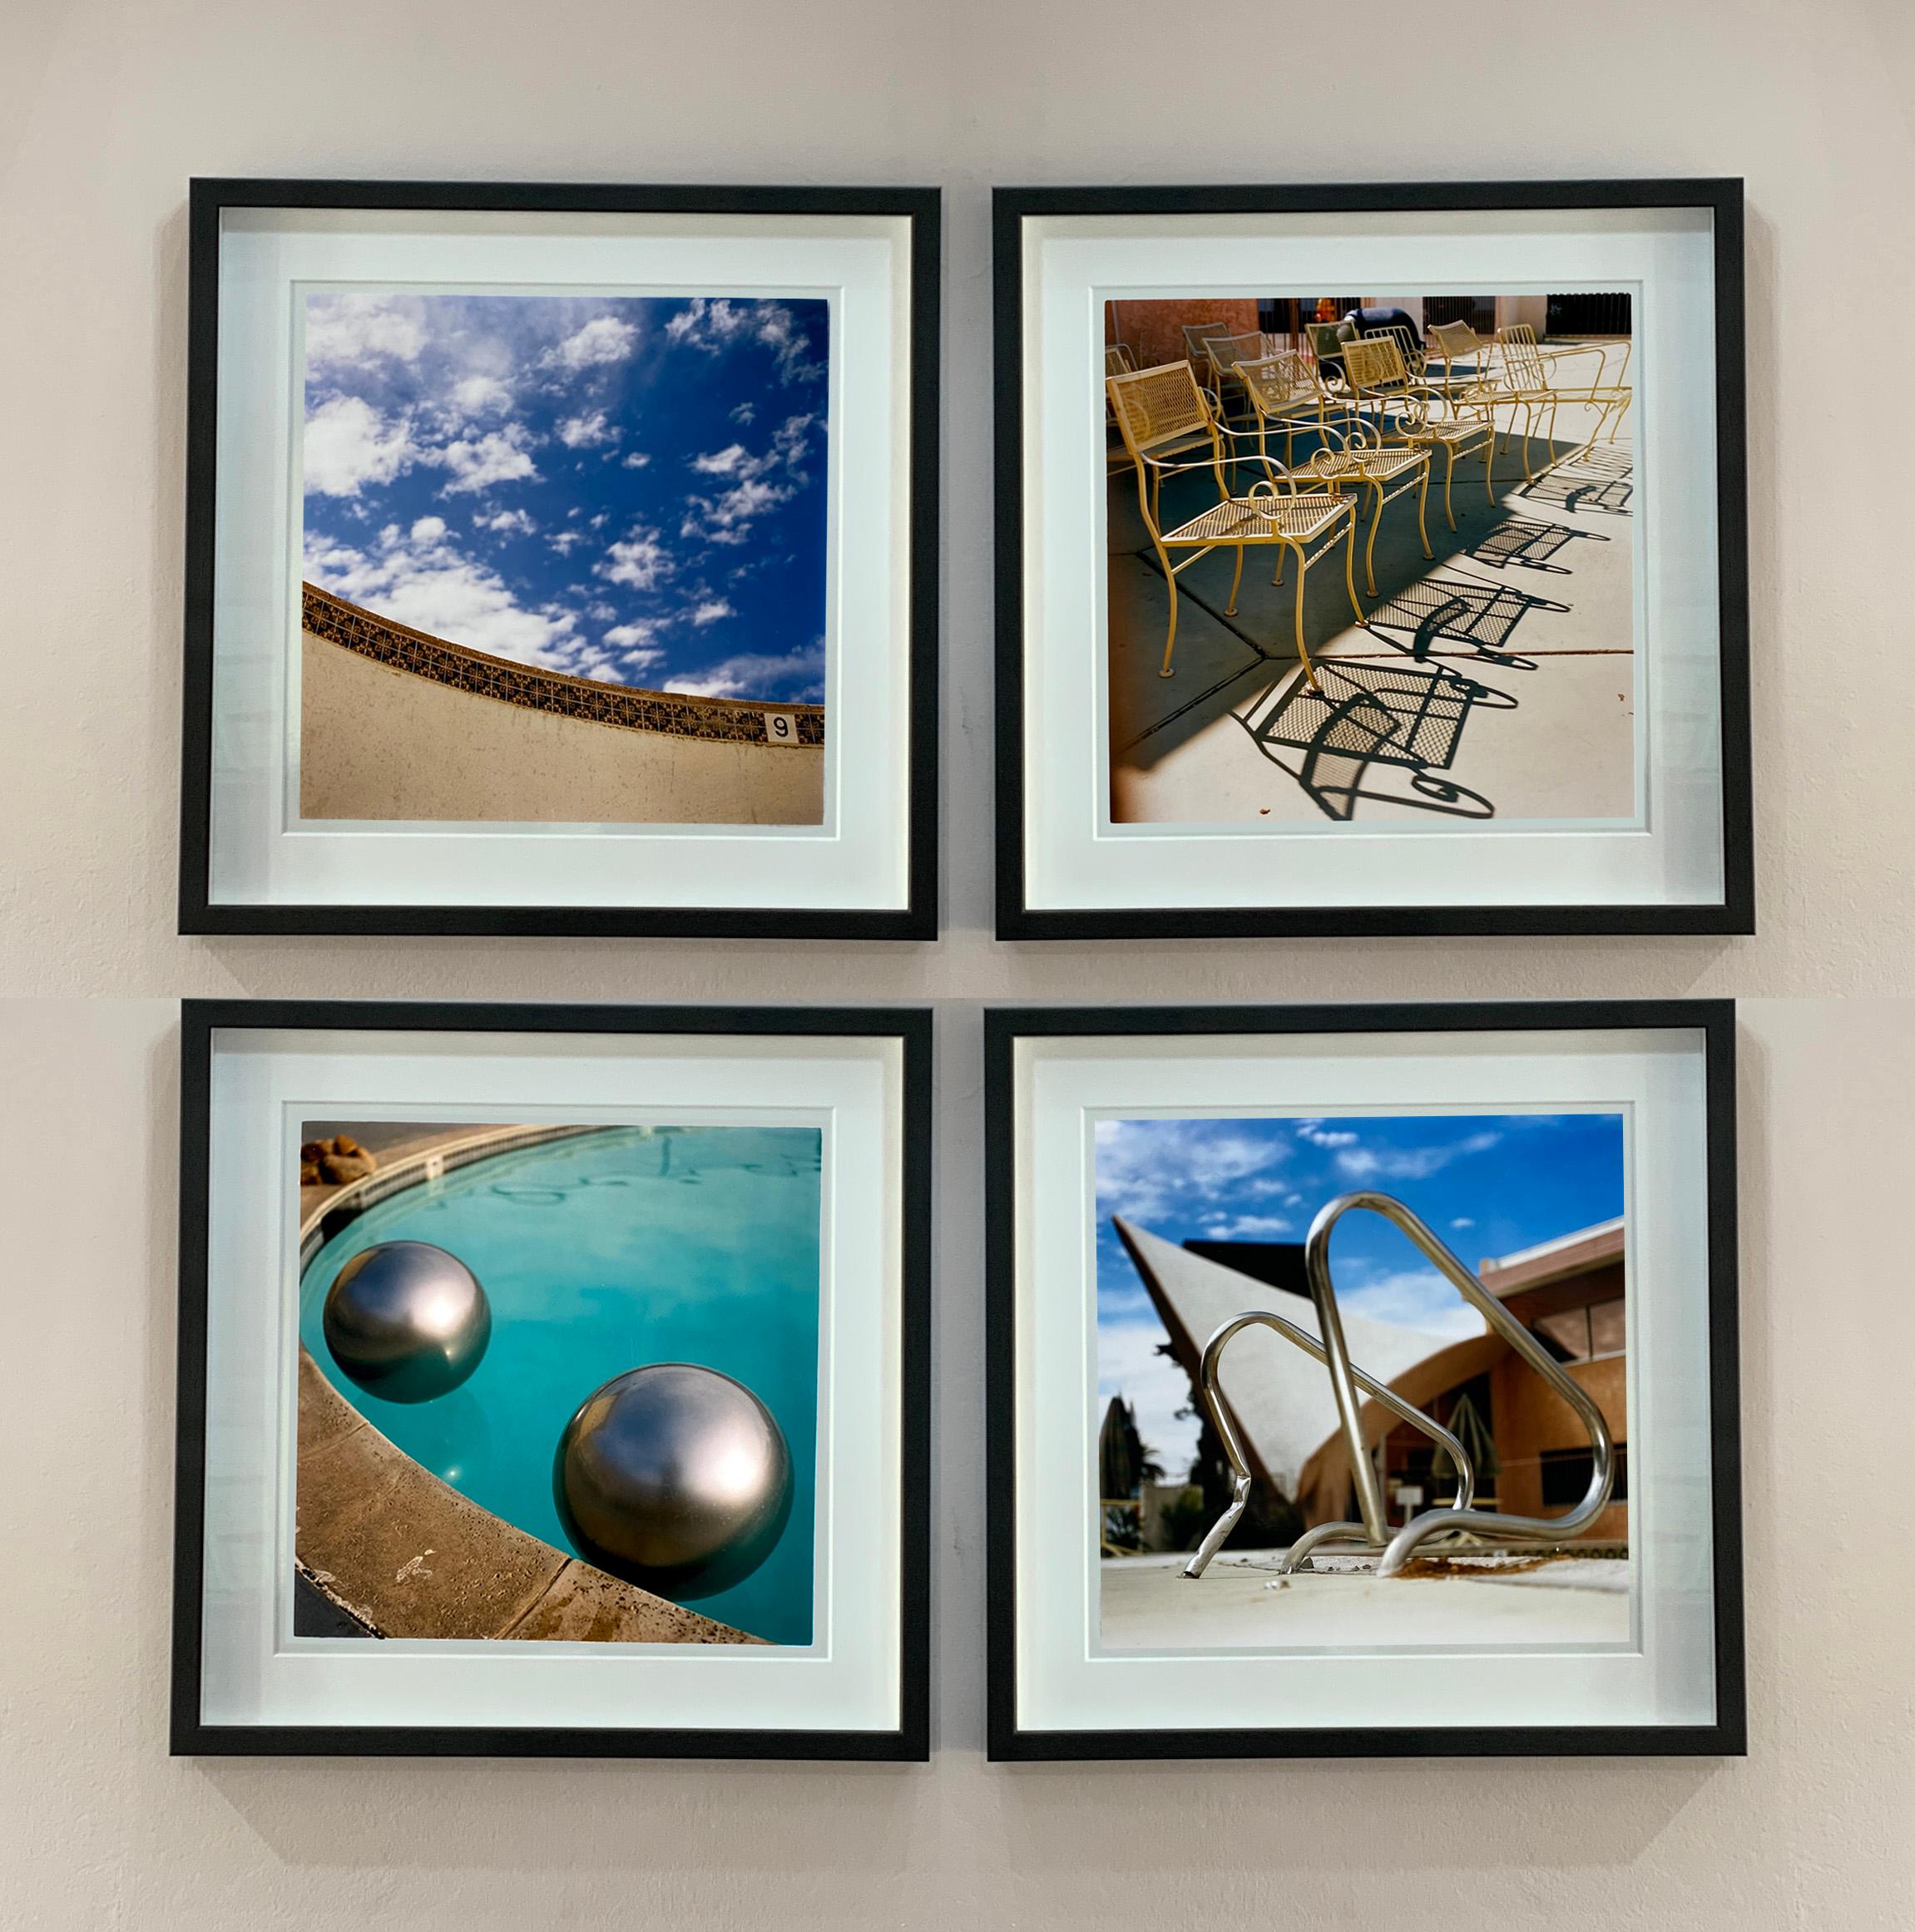 Metallic silver beach balls float on a bright blue pool in Palm Springs California, photography part of Richard Heeps Dream in Colour series.

This artwork is a limited edition of 25, gloss photographic print, presented in a museum board white